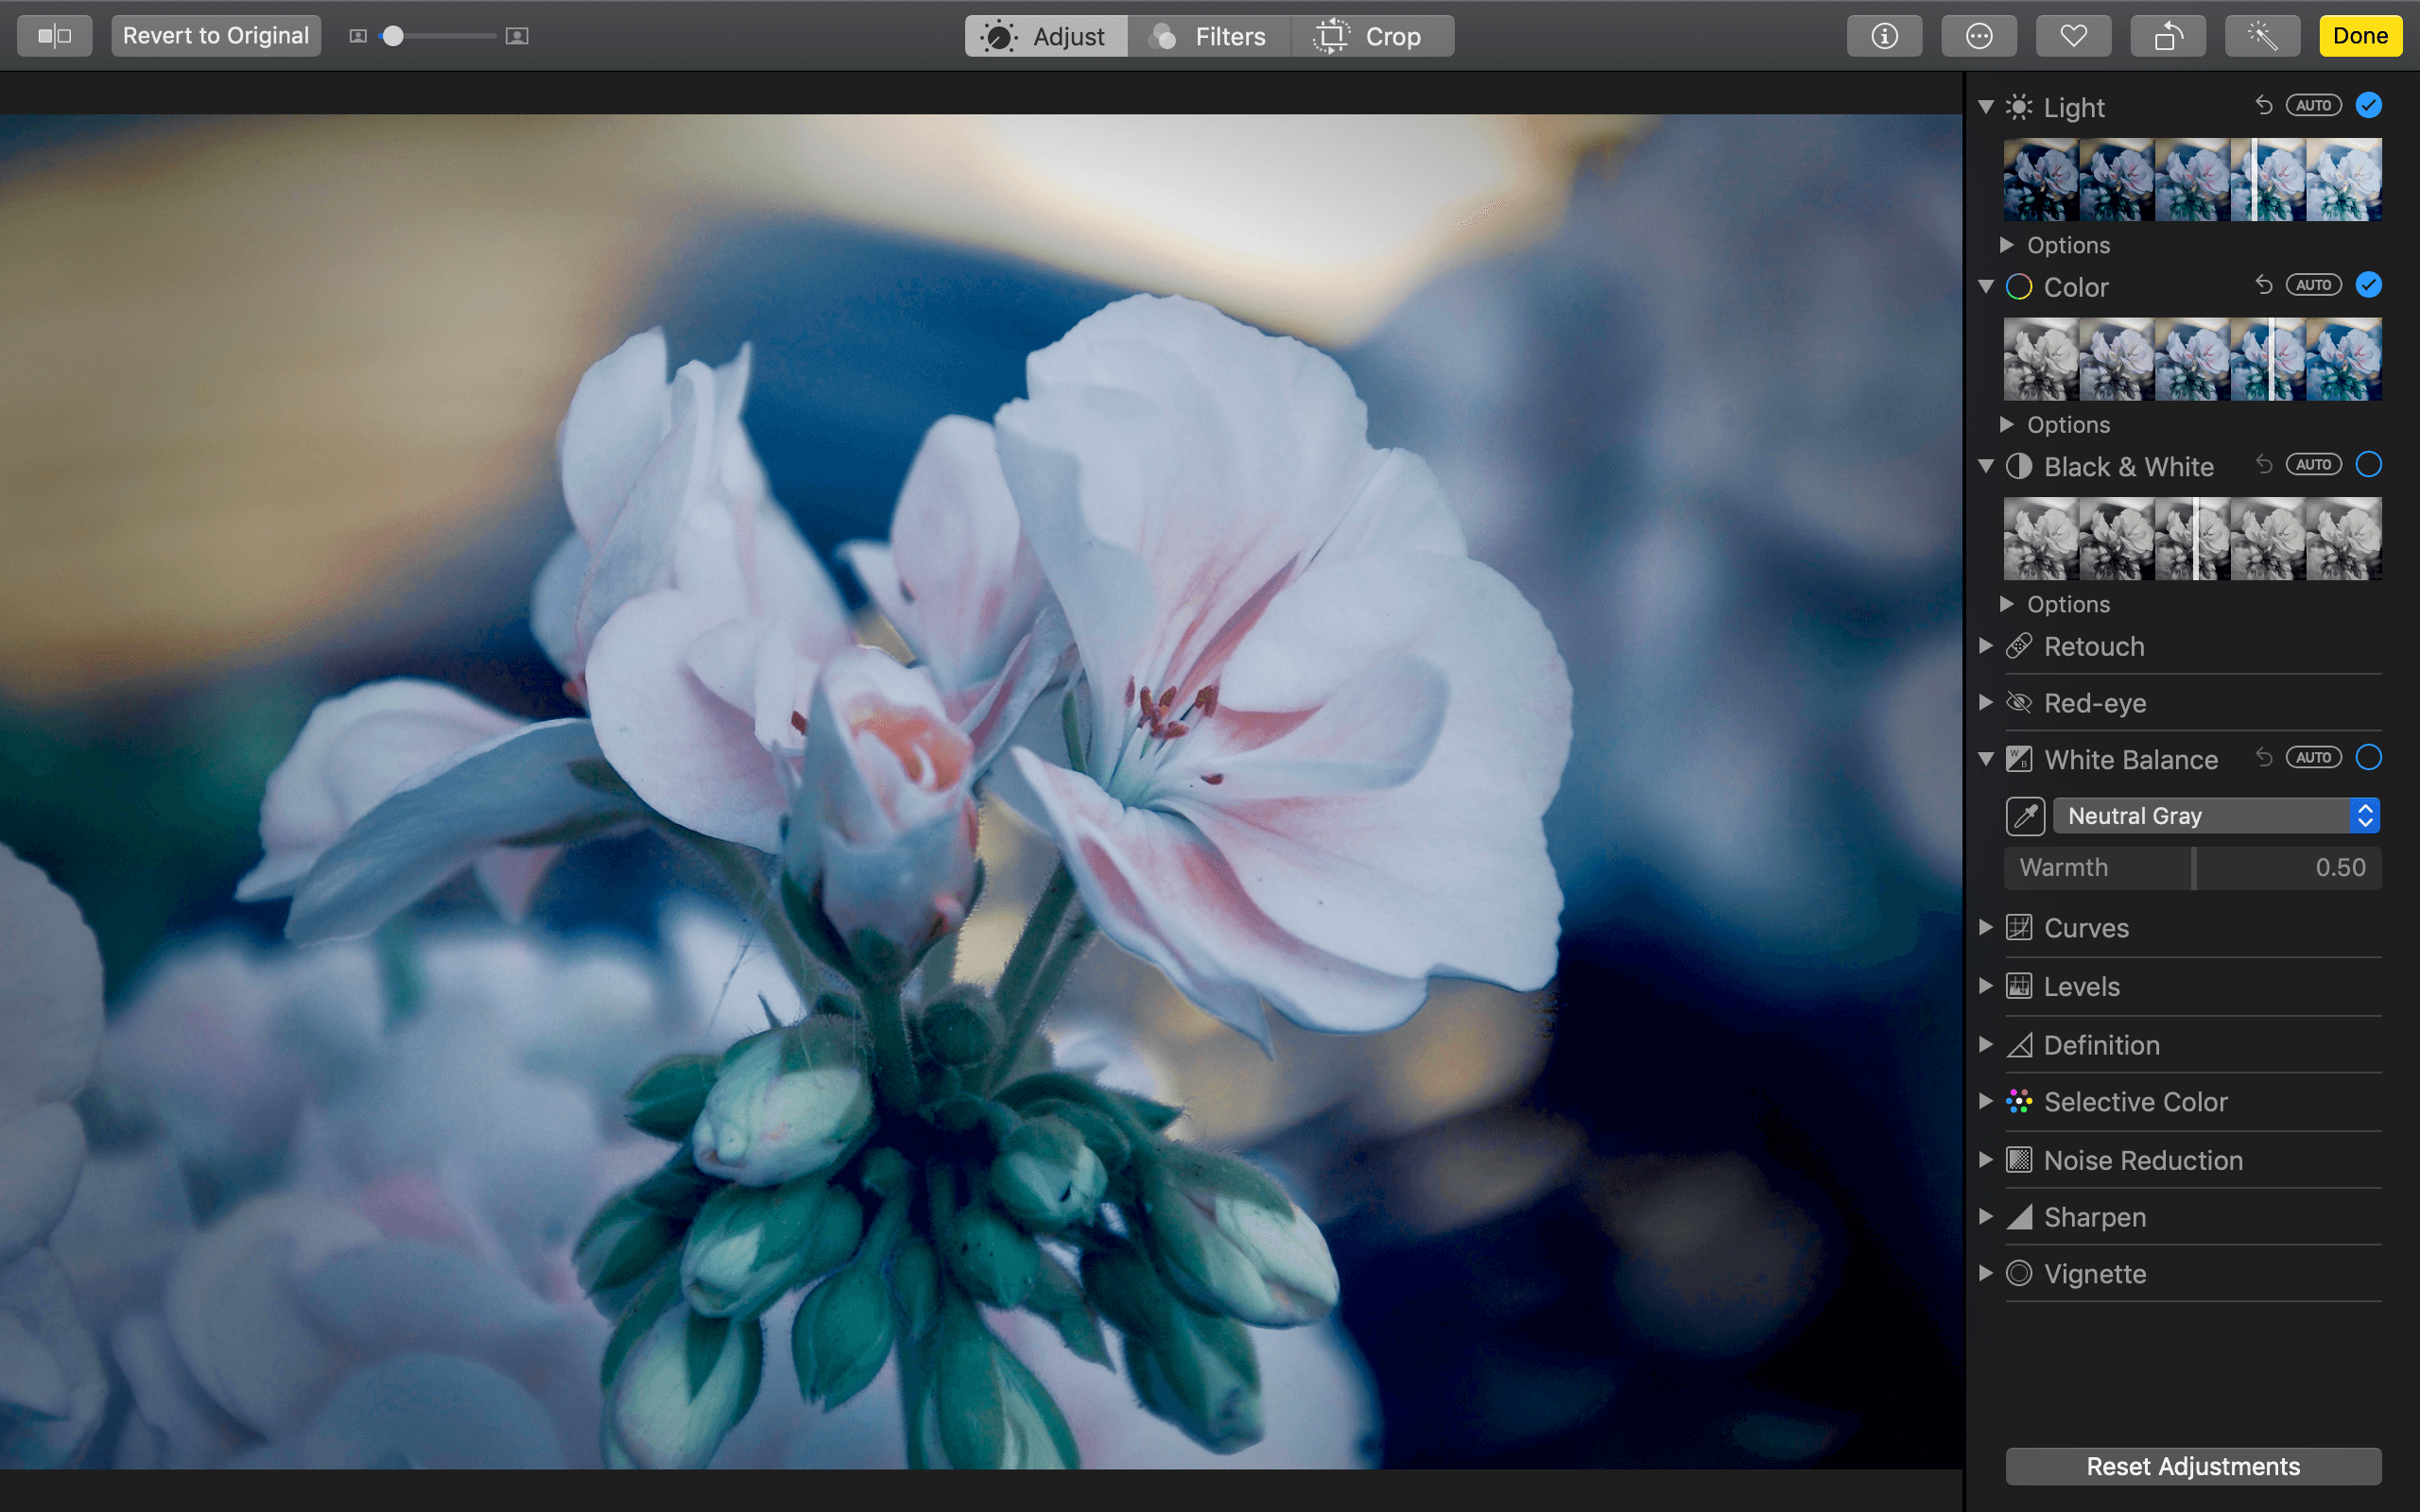 aperture software for mac review